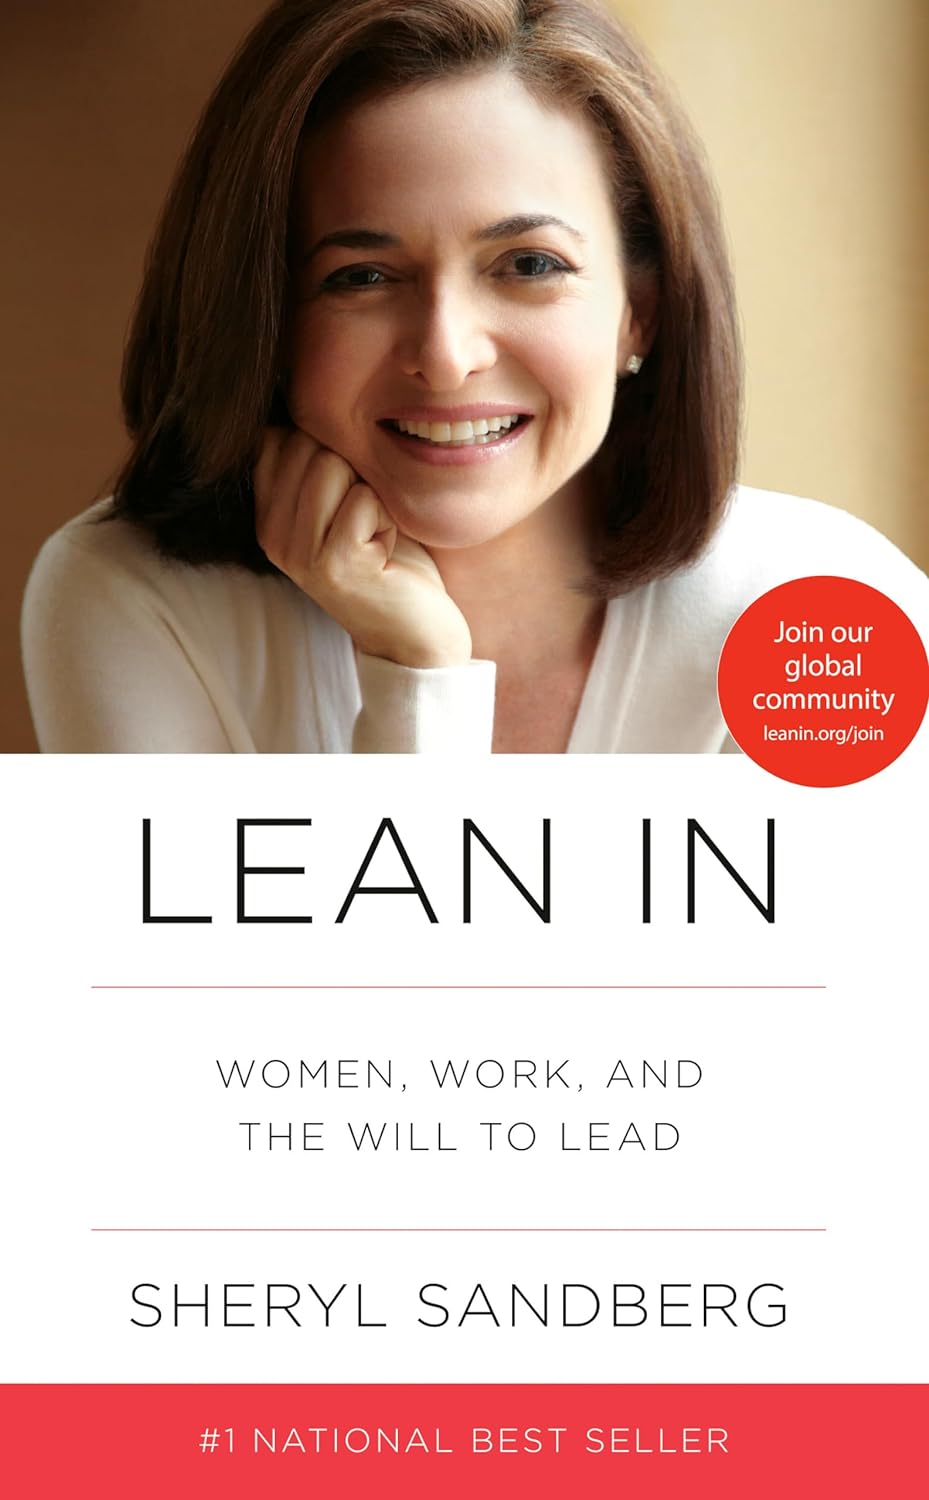 Lean In Women, Work, and the Will to Lead by Sheryl Sandberg